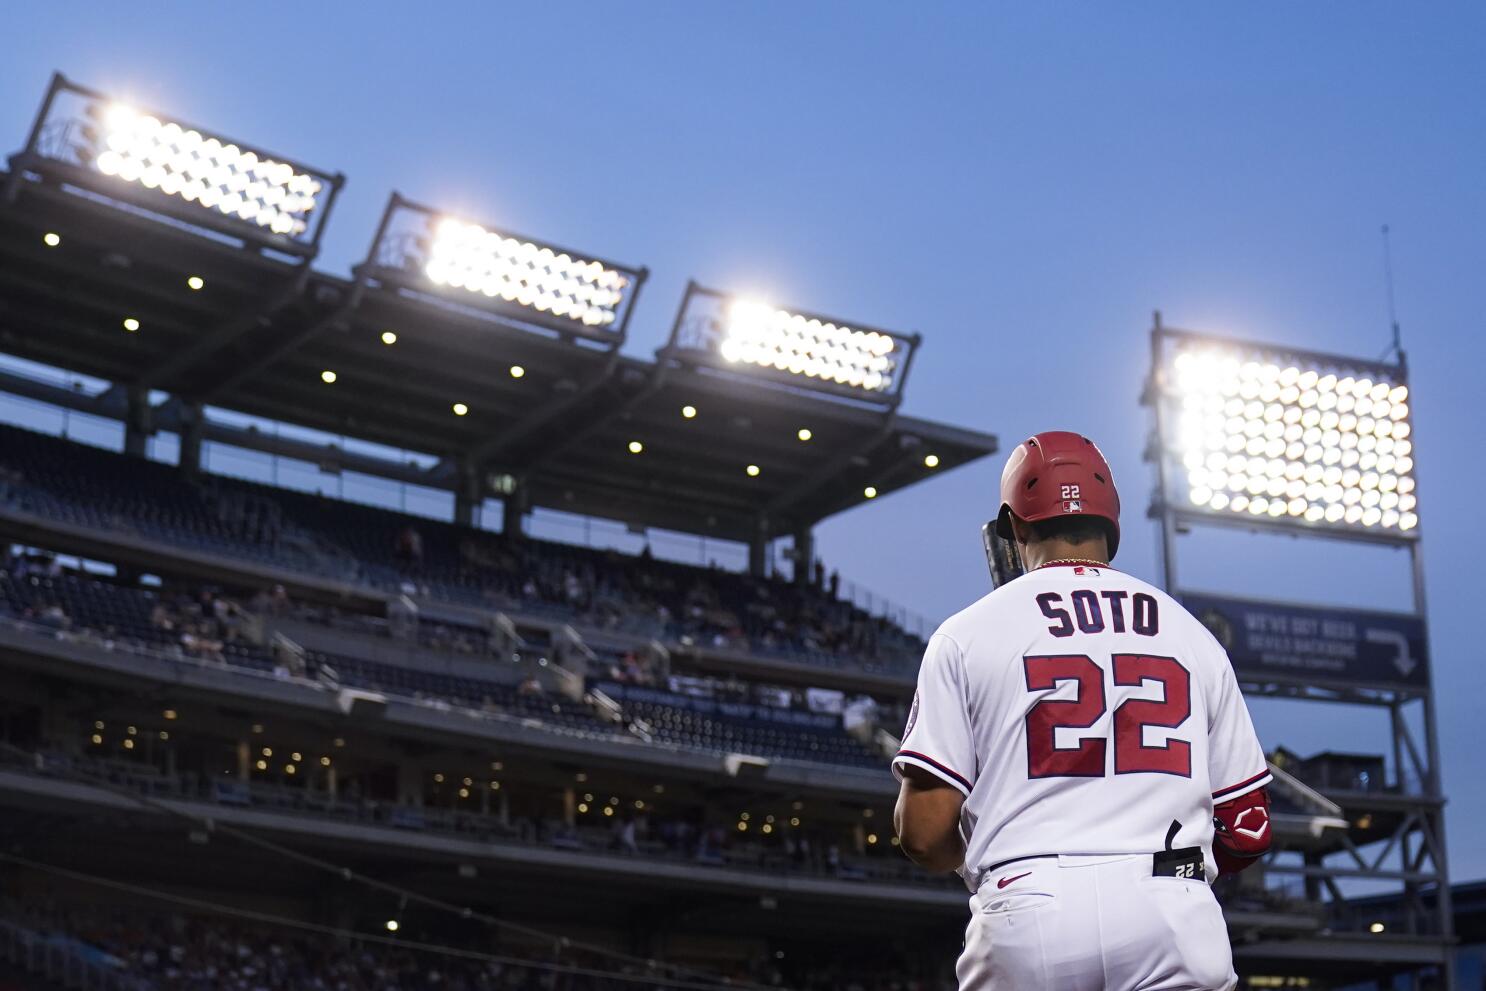 JUAN SOTO DEBUT!! All-Star joins Padres, gets huge cheers from San Diego  fans!! 